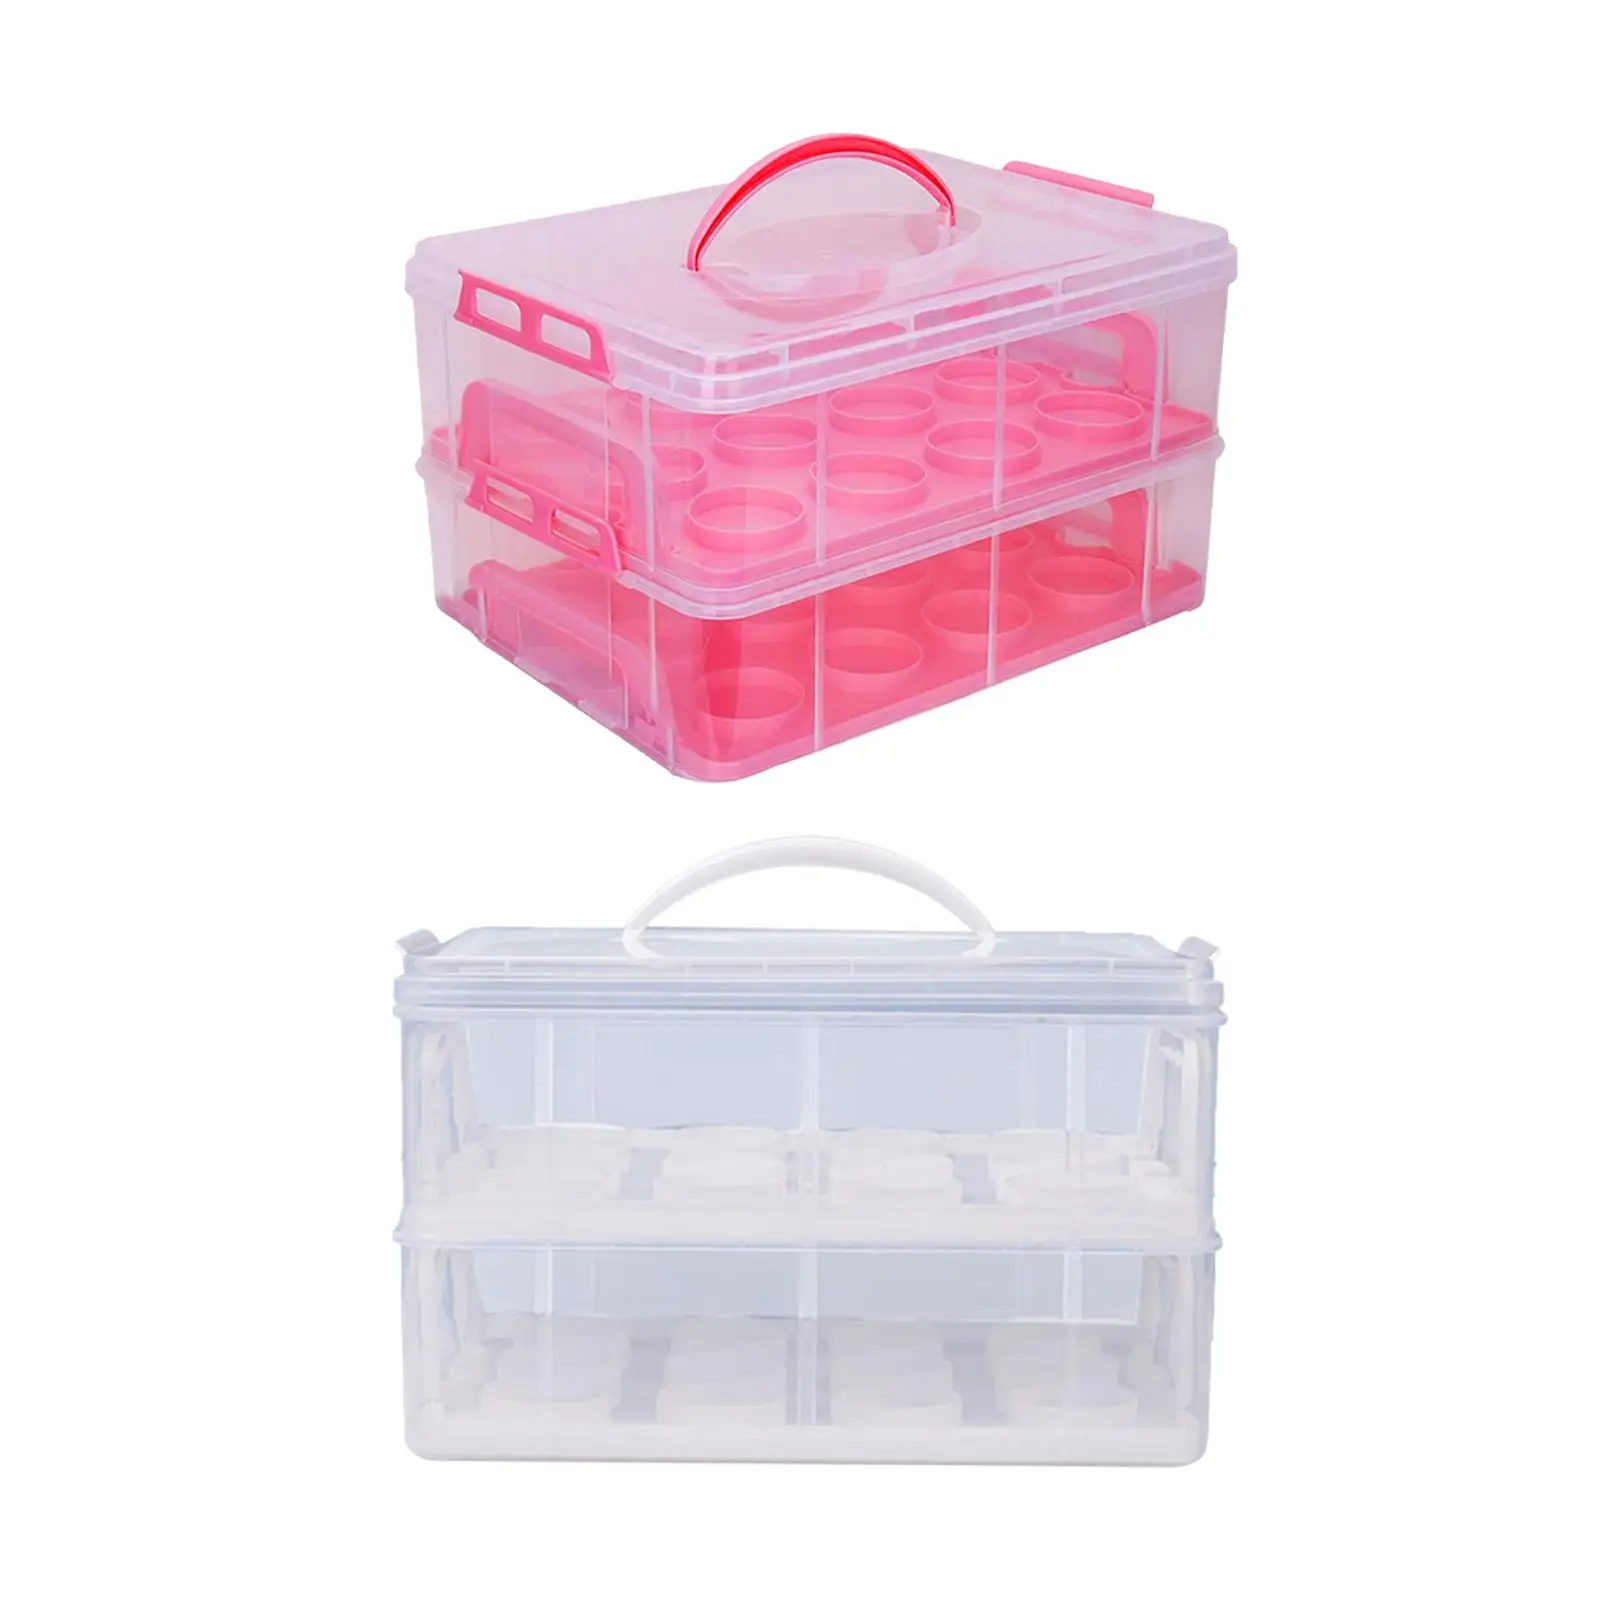 Cupcake Storage Containers with Locking Lid Stackable Layer Insert for Pies